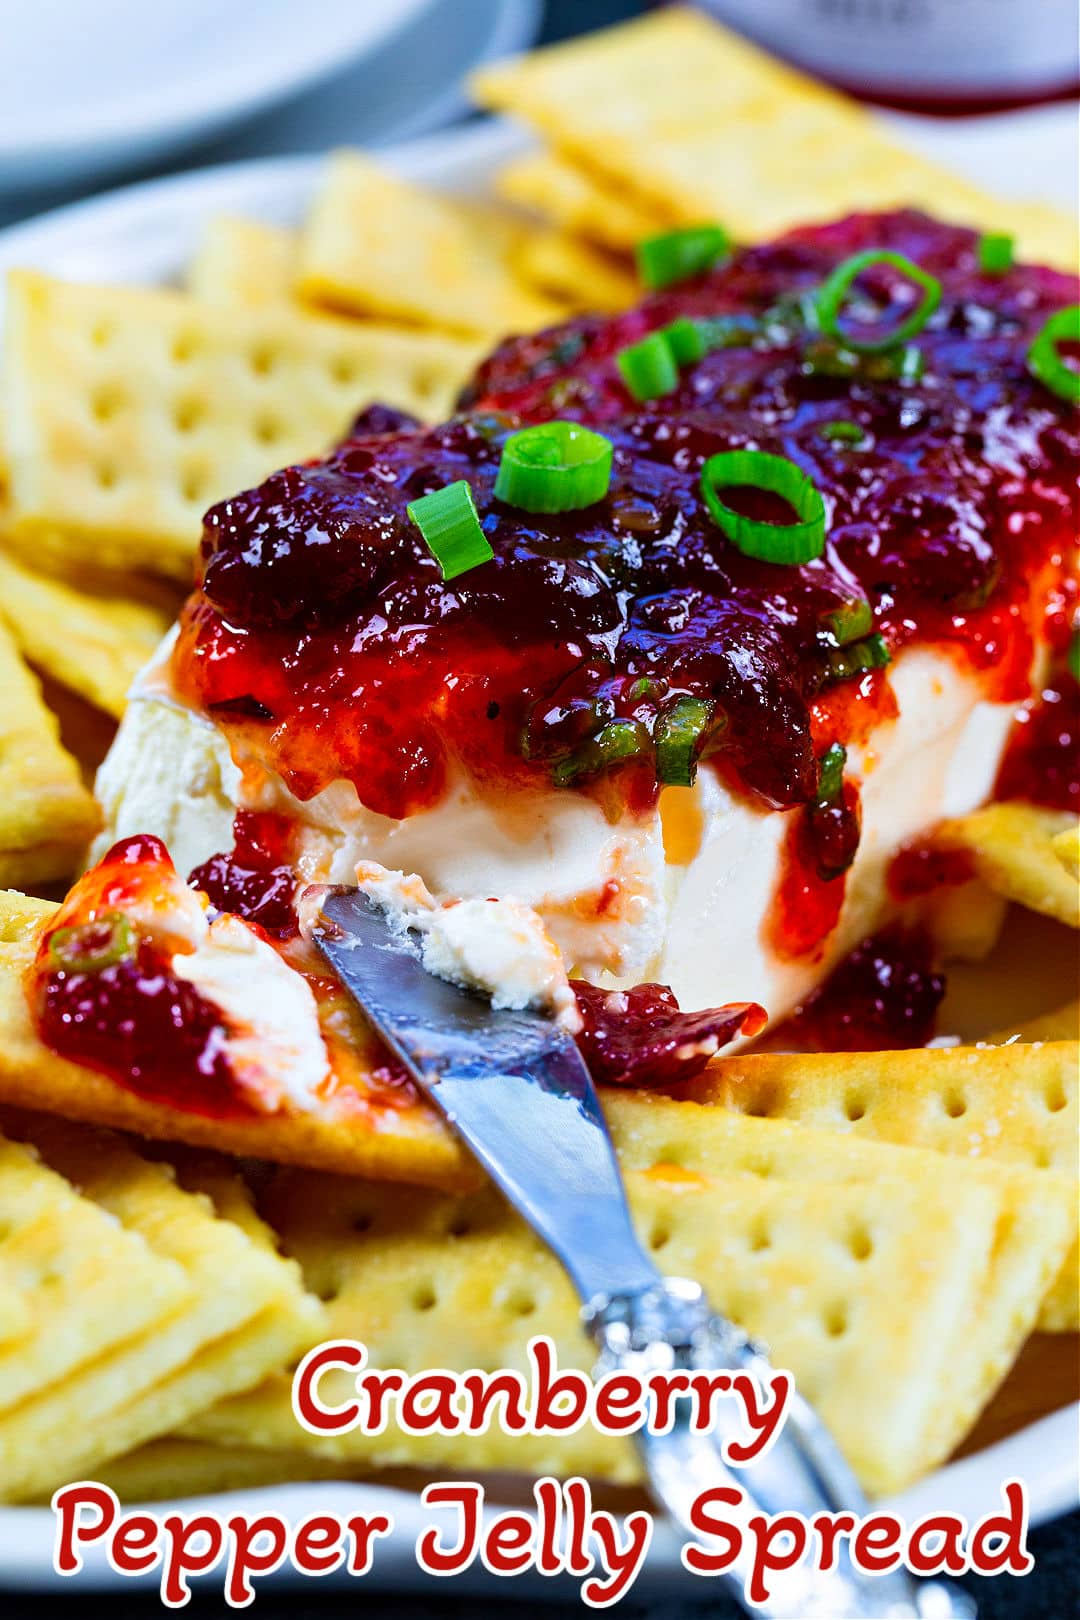 Cranberry Pepper Jelly Spread on plate with crackers.